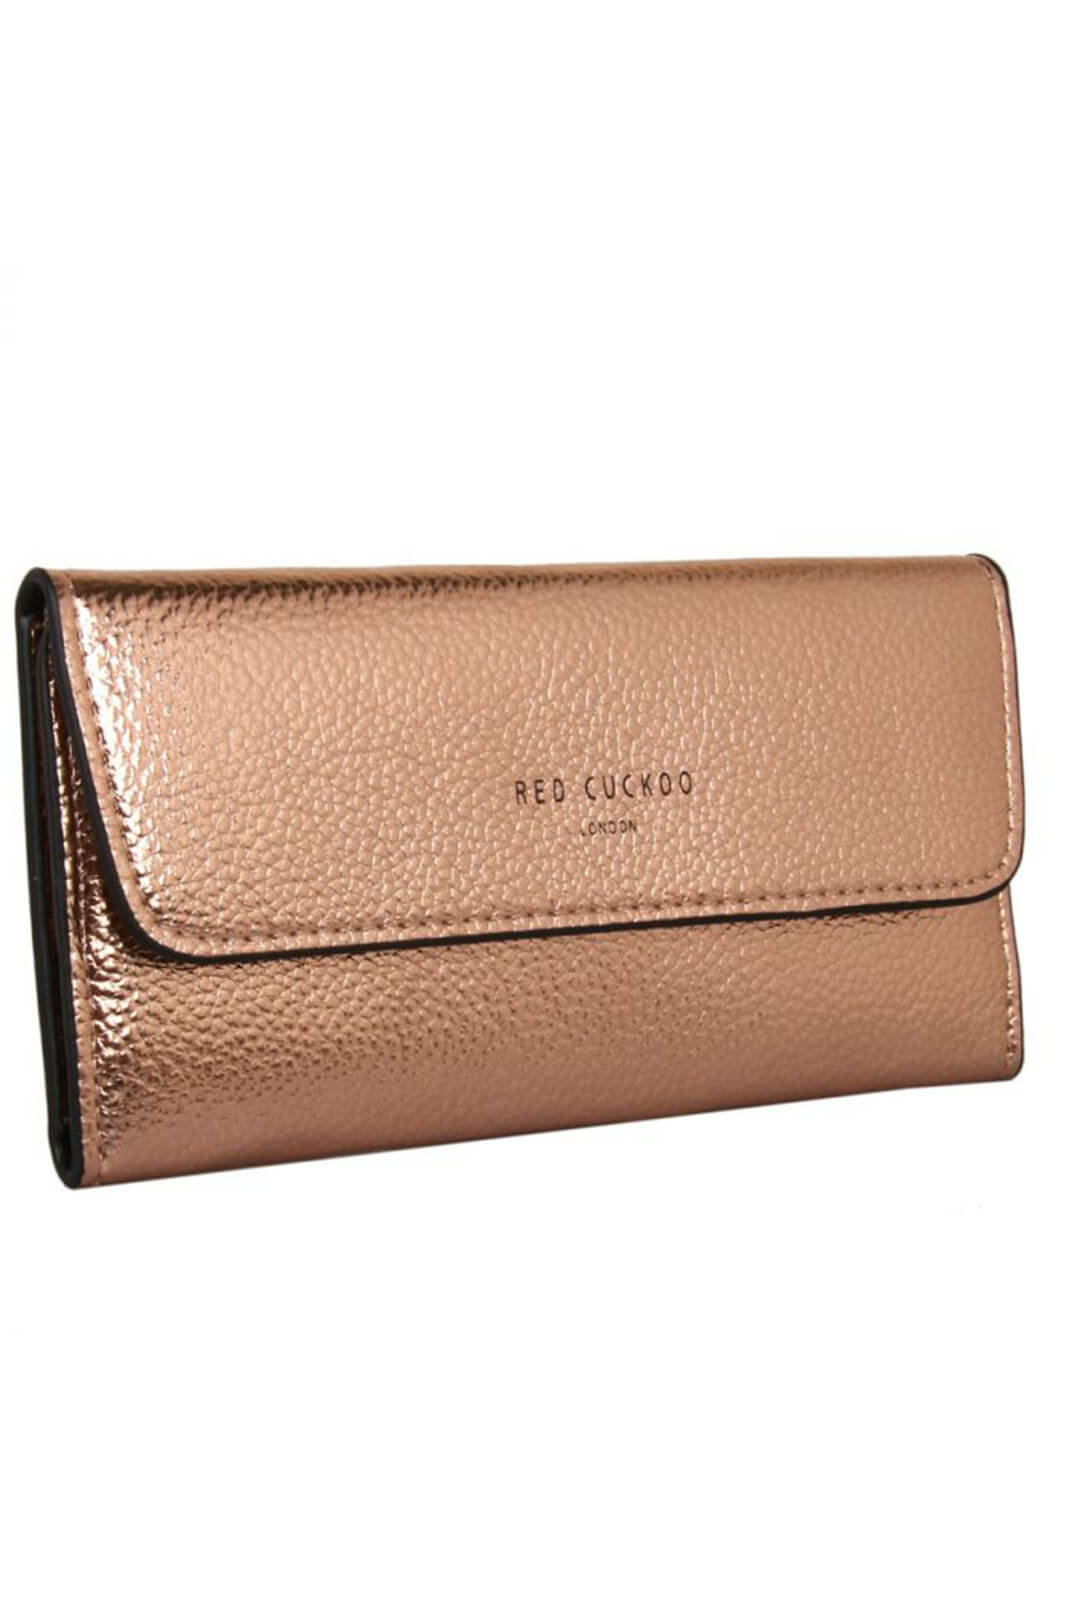 Red Cuckoo 588 Rose Gold Purse - Shirley Allum Boutique